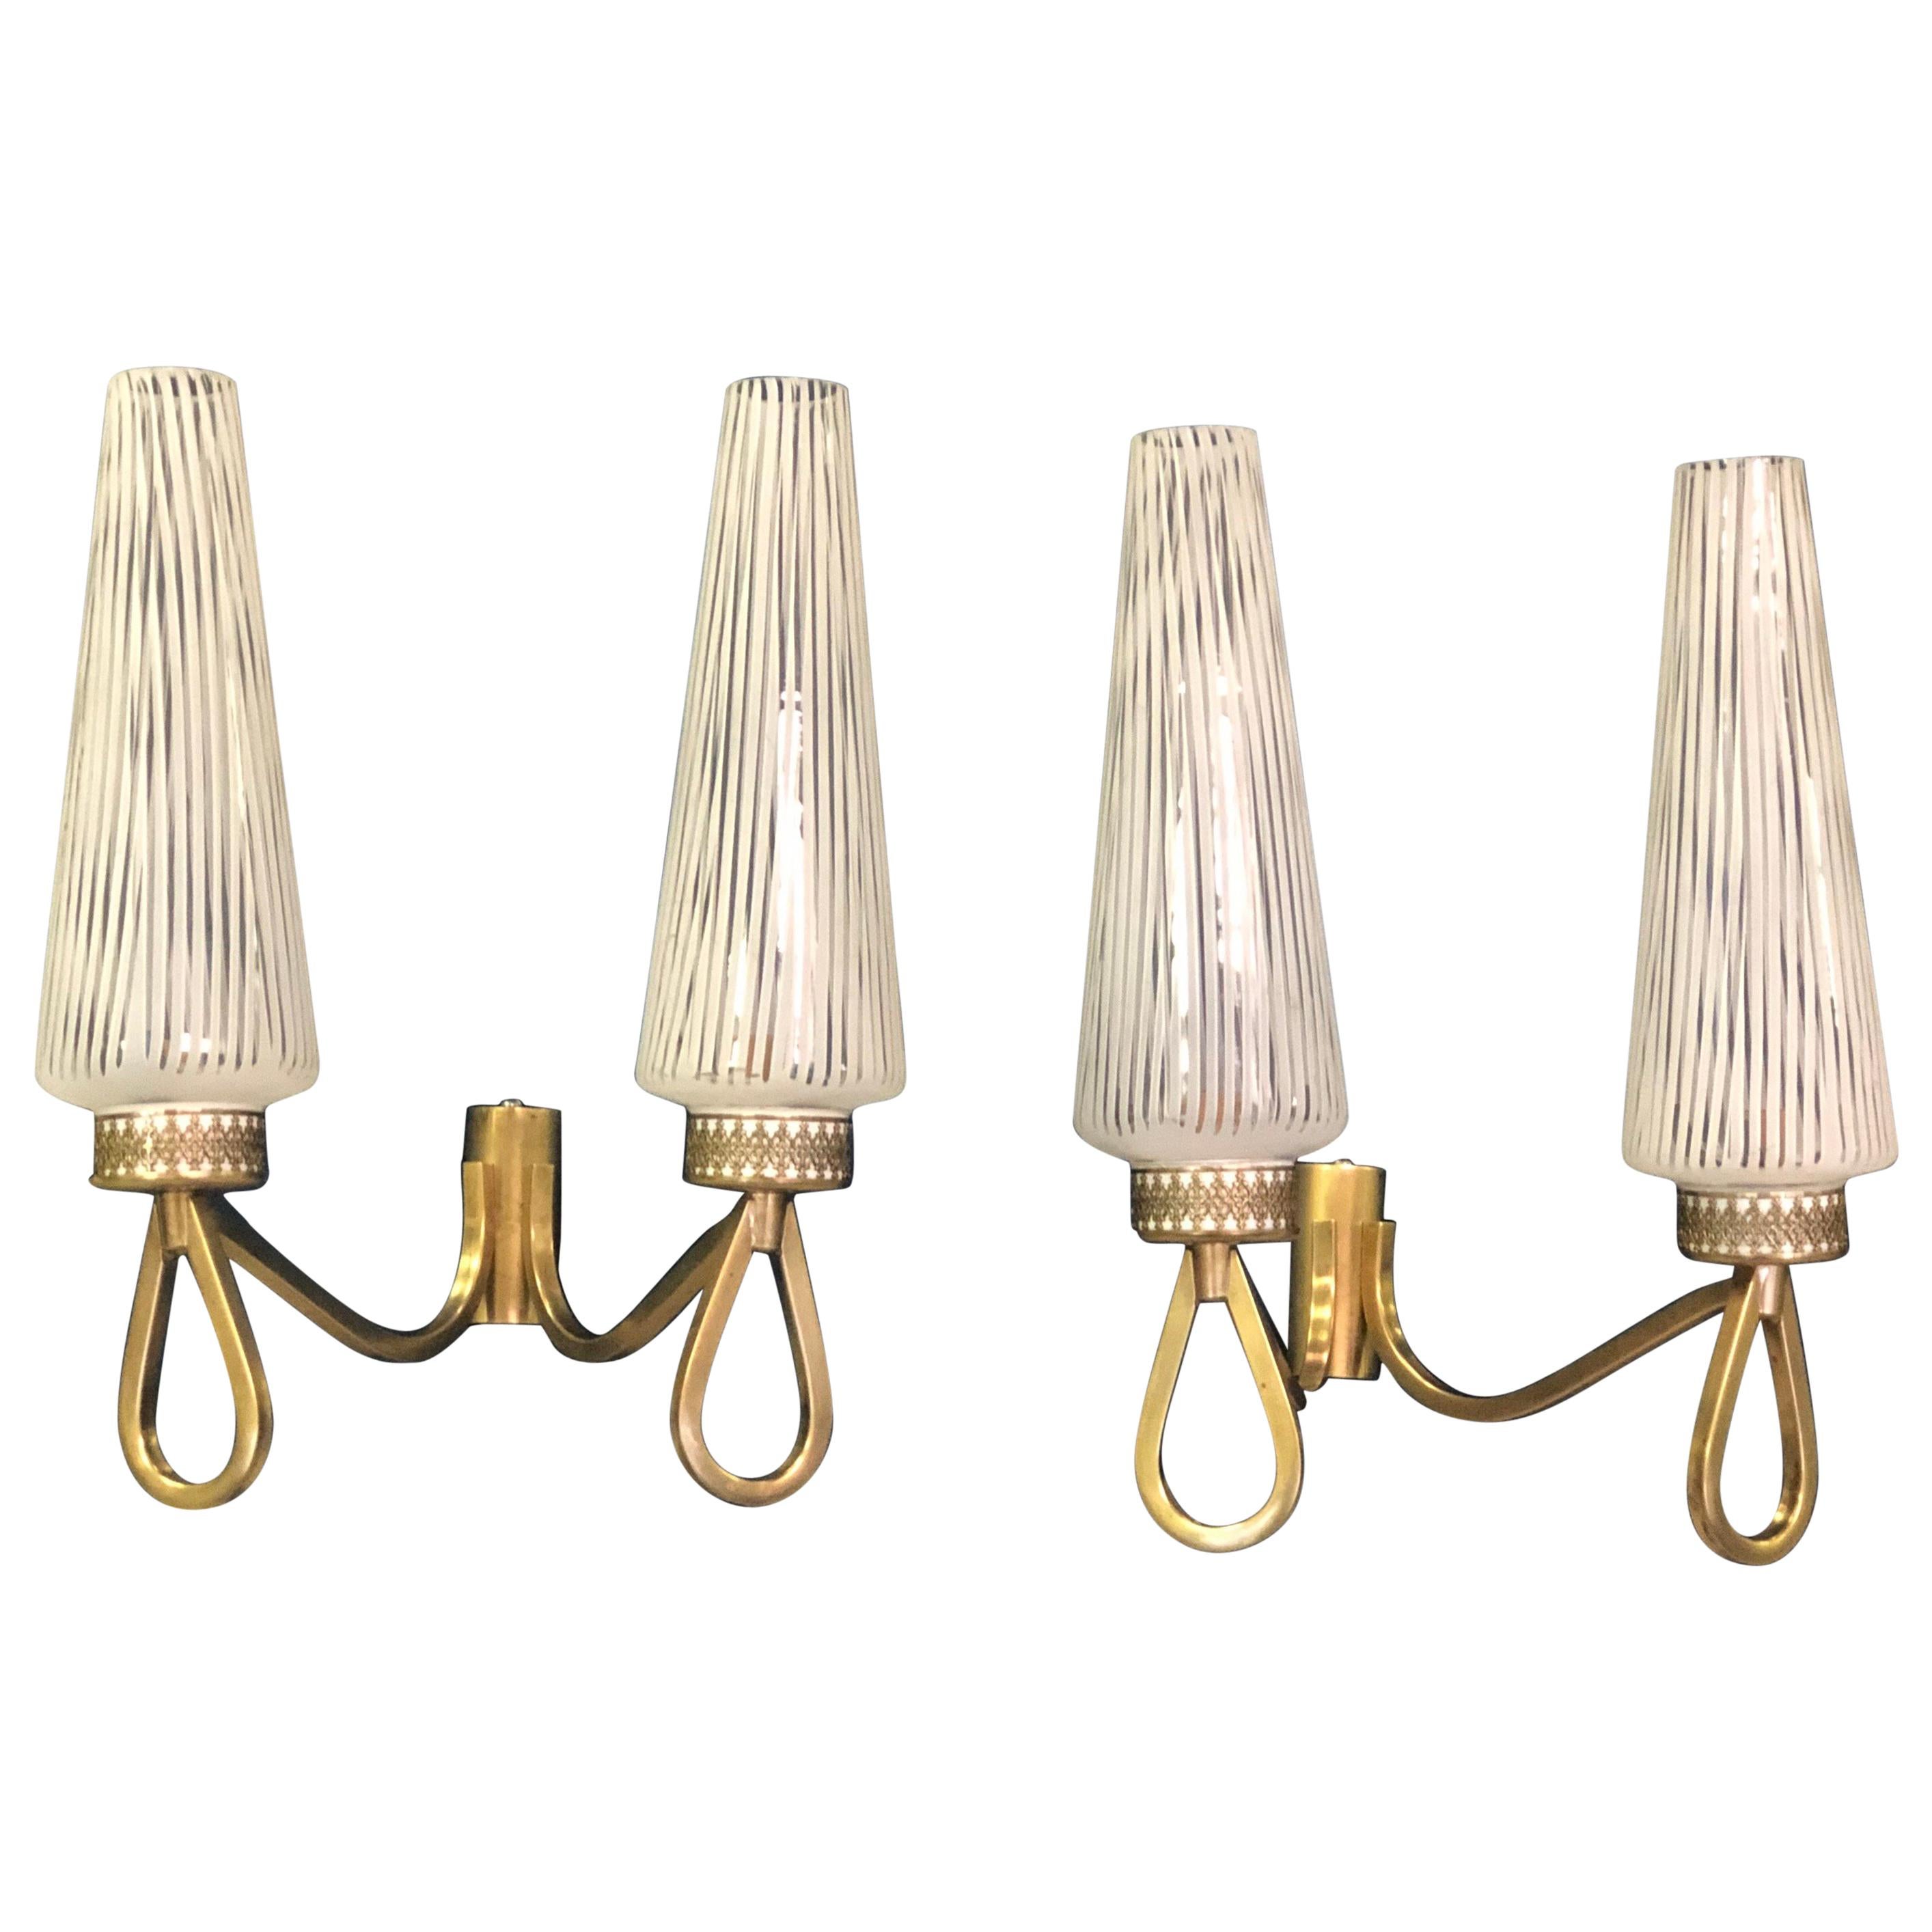 Pair of Double Arm Italian Midcentury Murano Sconces with Glass by Venini